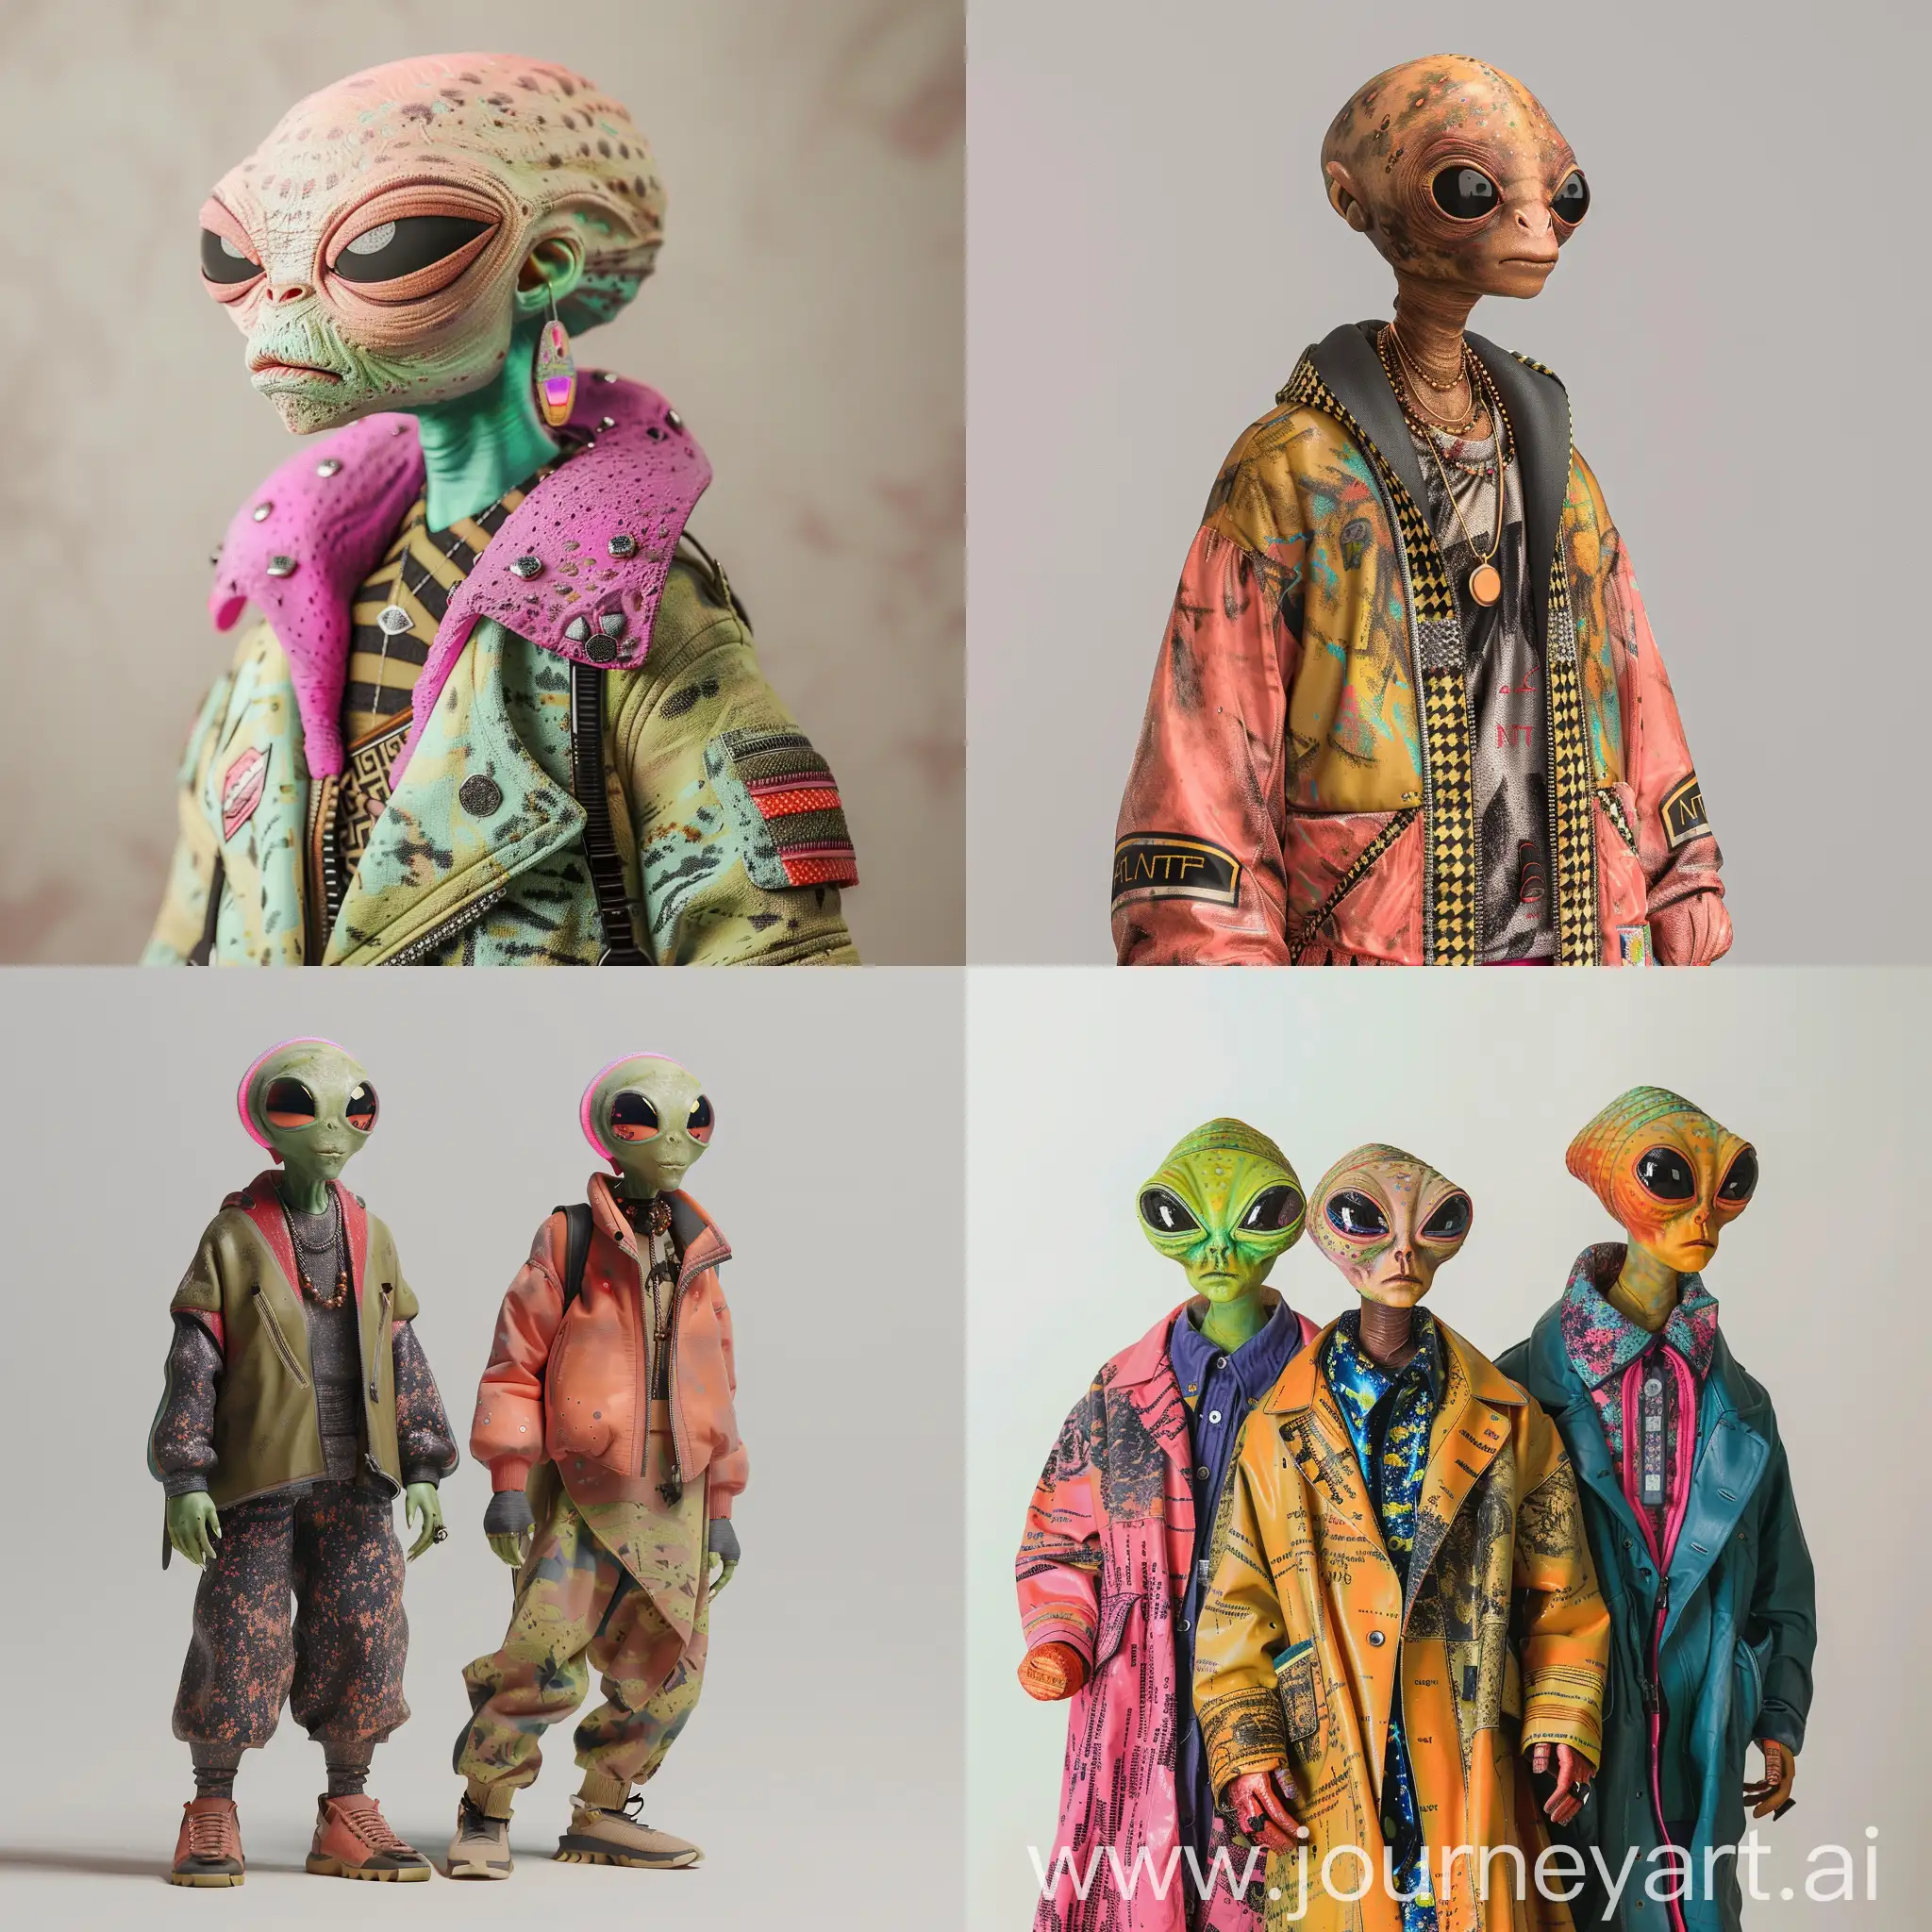 a nft characters, mars aliens, wearing balenciaga style clothes, pinkpastels --ar 1:1